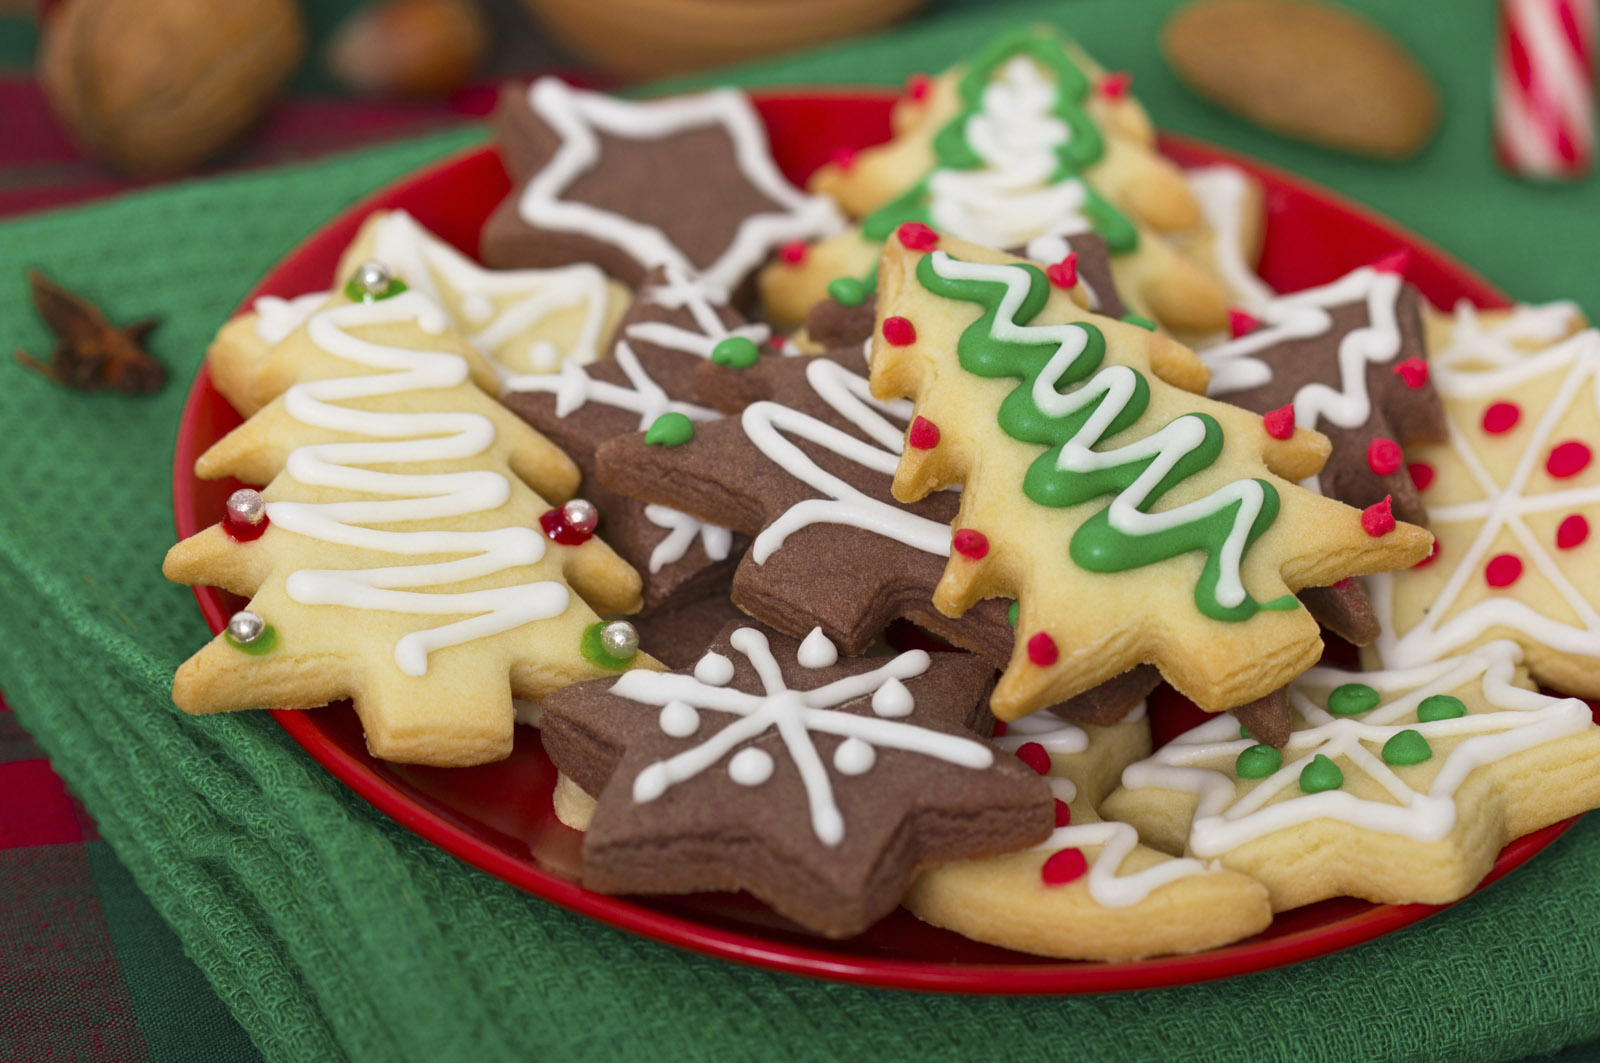 Strategies for avoiding holiday weight gain